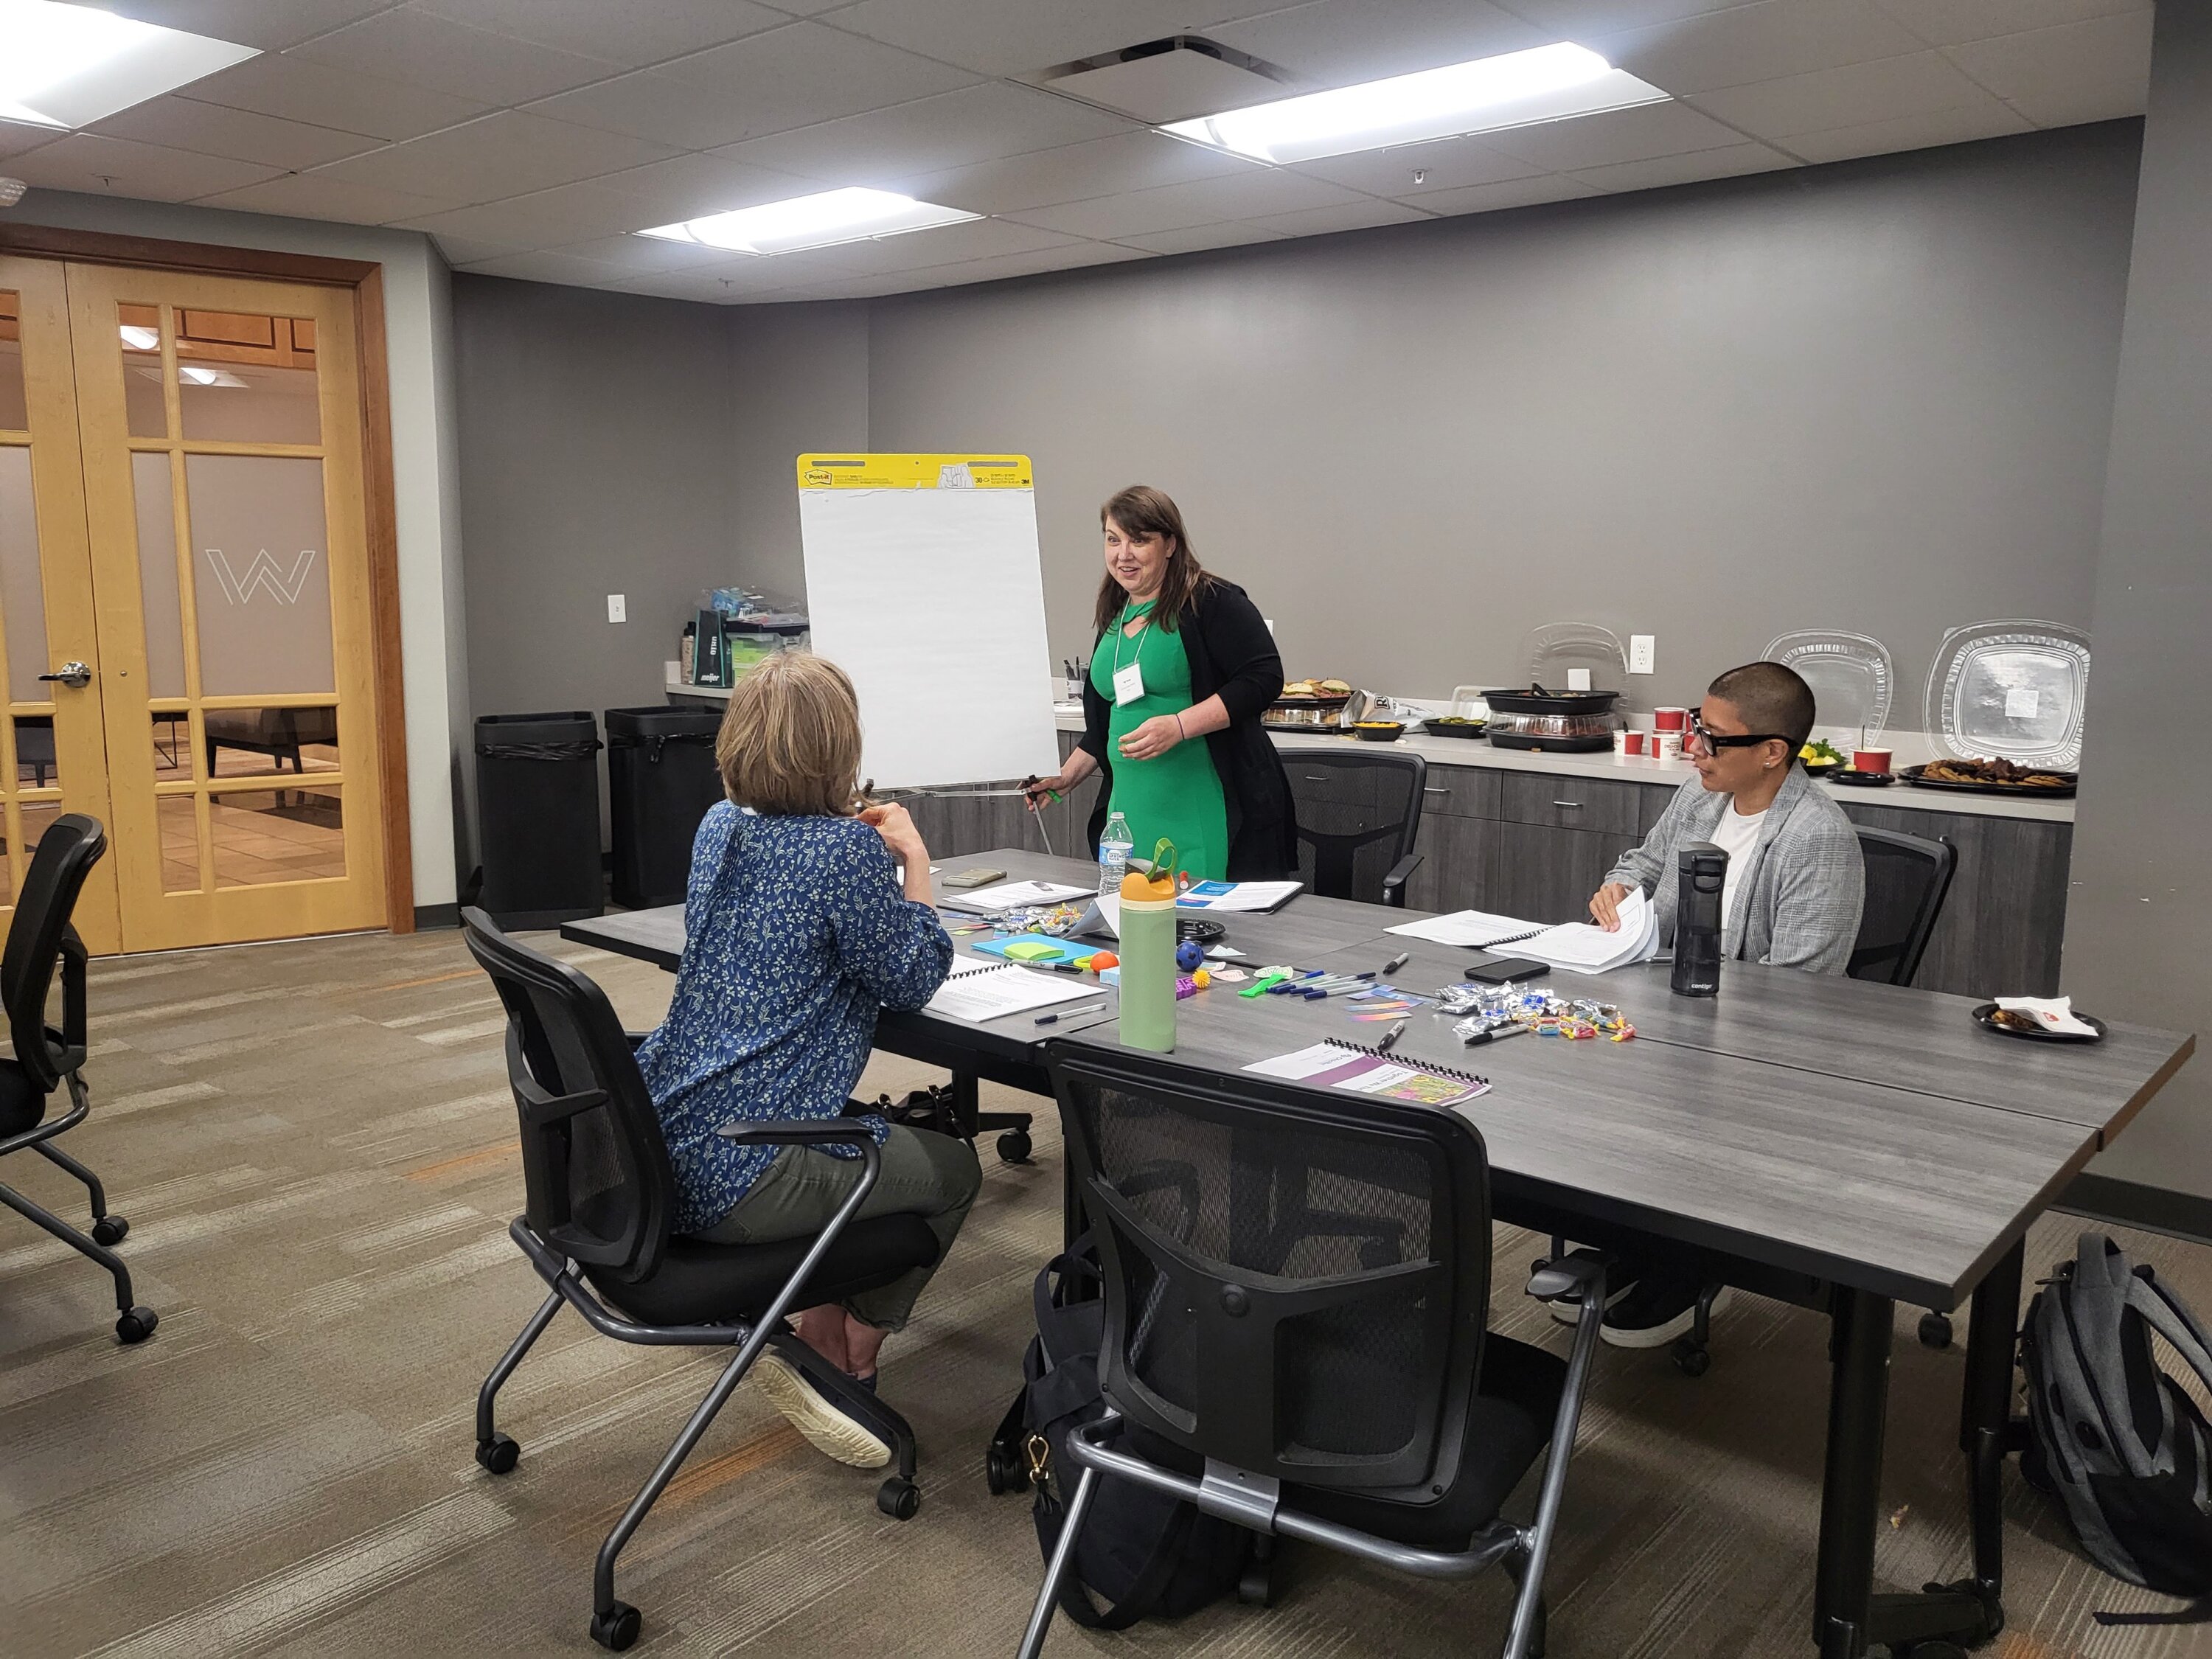 Elizabeth Lang (pictured standing), Digital Librarian at Cincinnati Children’s Hospital, facilitates discussion during the Together We Thrive: Dream Summit.